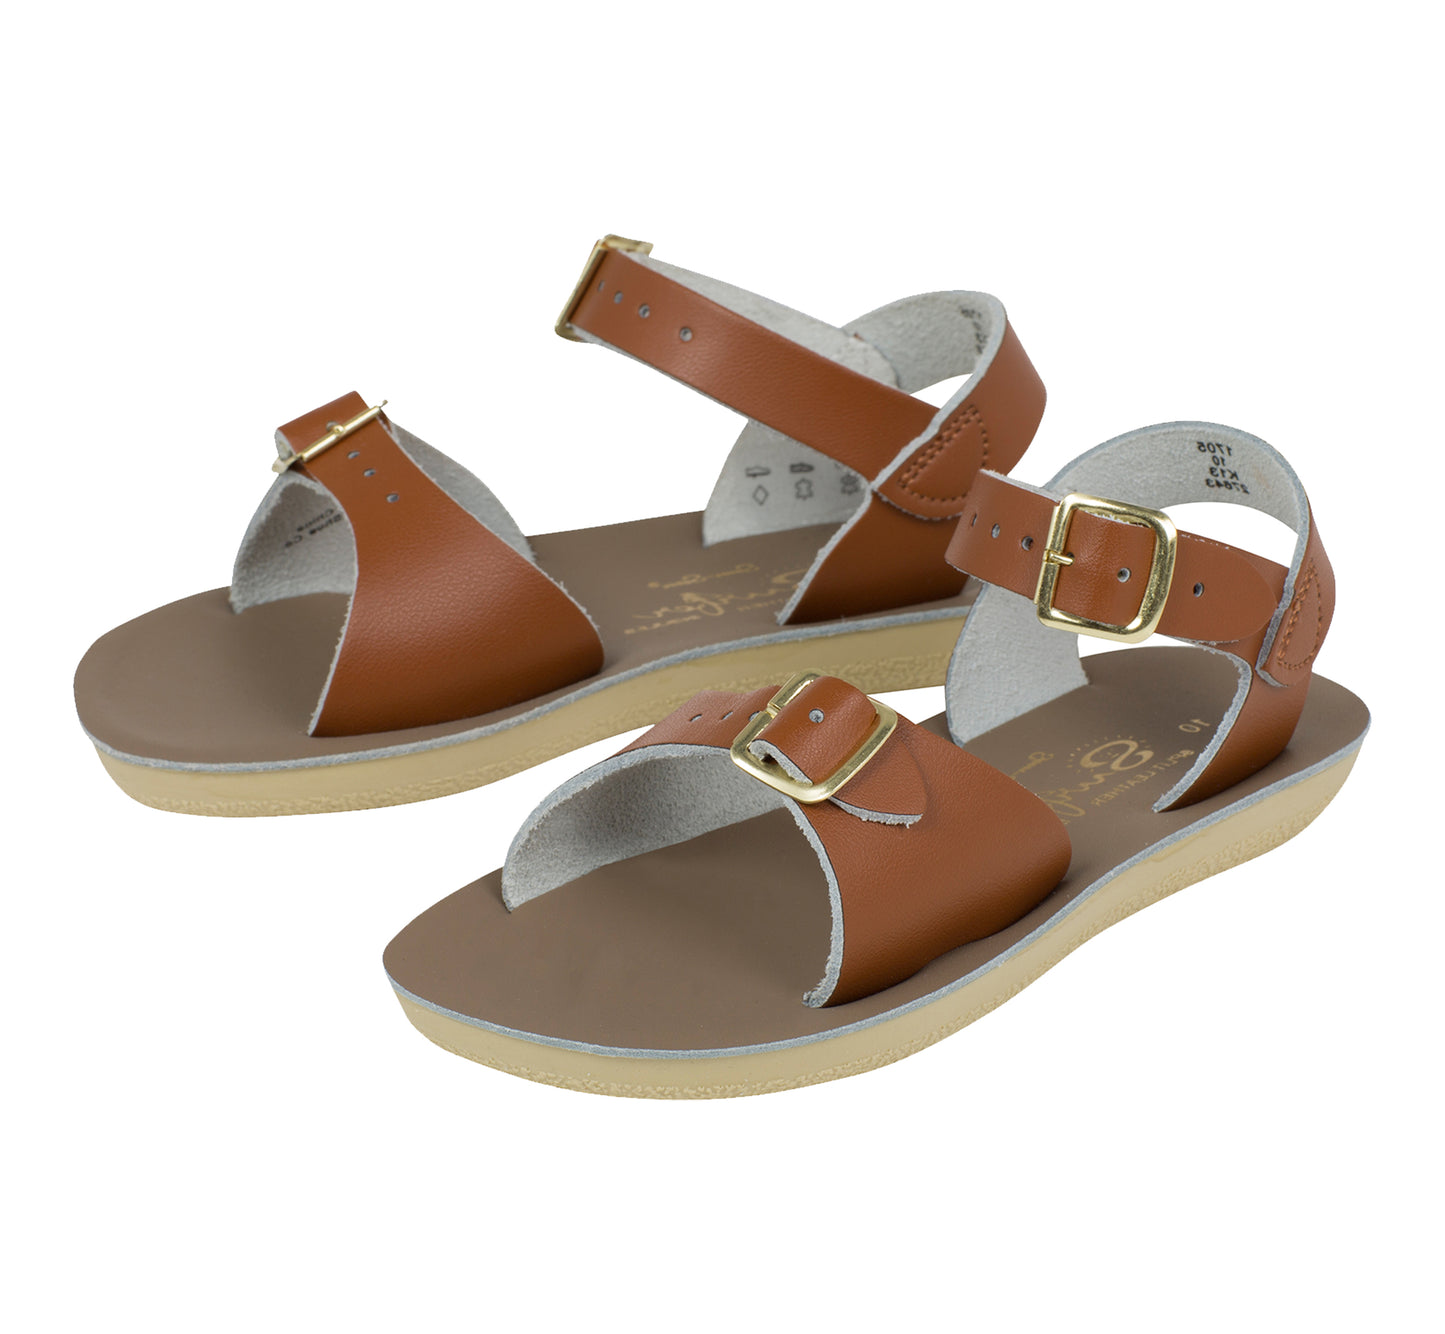 A unisex sandal by Salt Water Sandals in tan with double buckle fastening across the instep and around the ankle. Open Toe and Sling-back. Pair view.